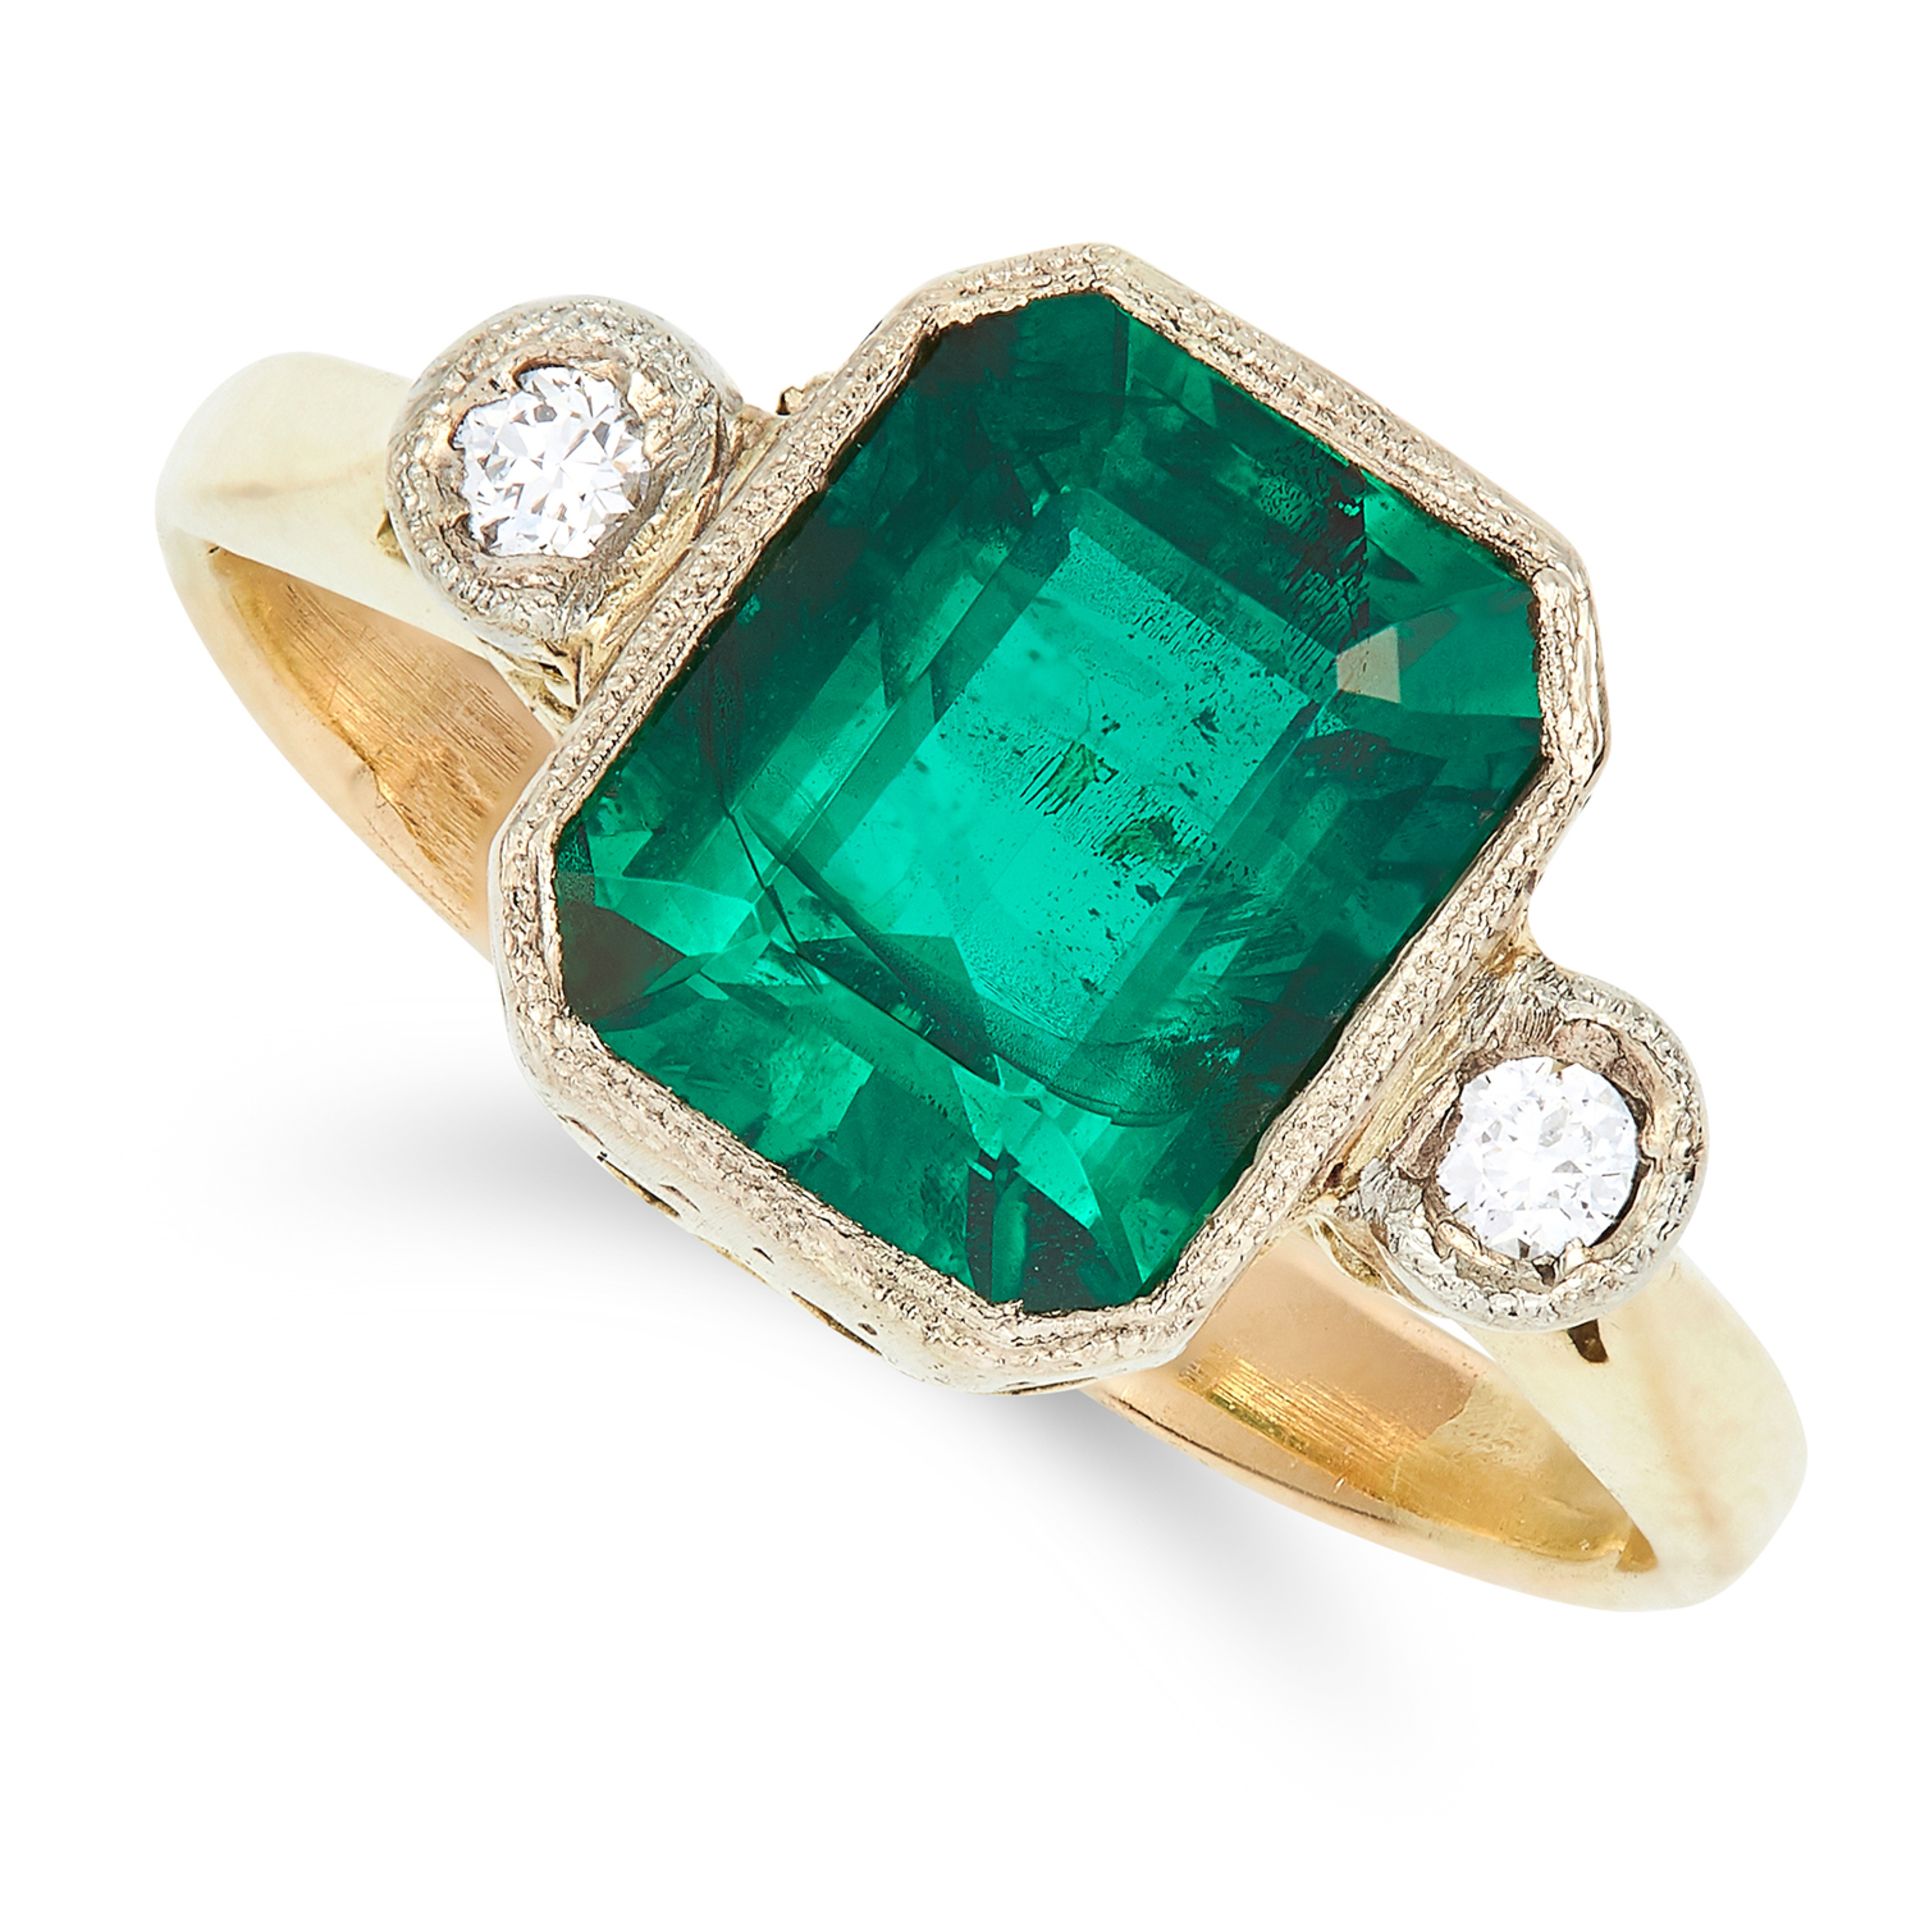 AN ANTIQUE SYNTHETIC EMERALD AND DIAMOND RING set with an emerald cut synthetic emerald and round